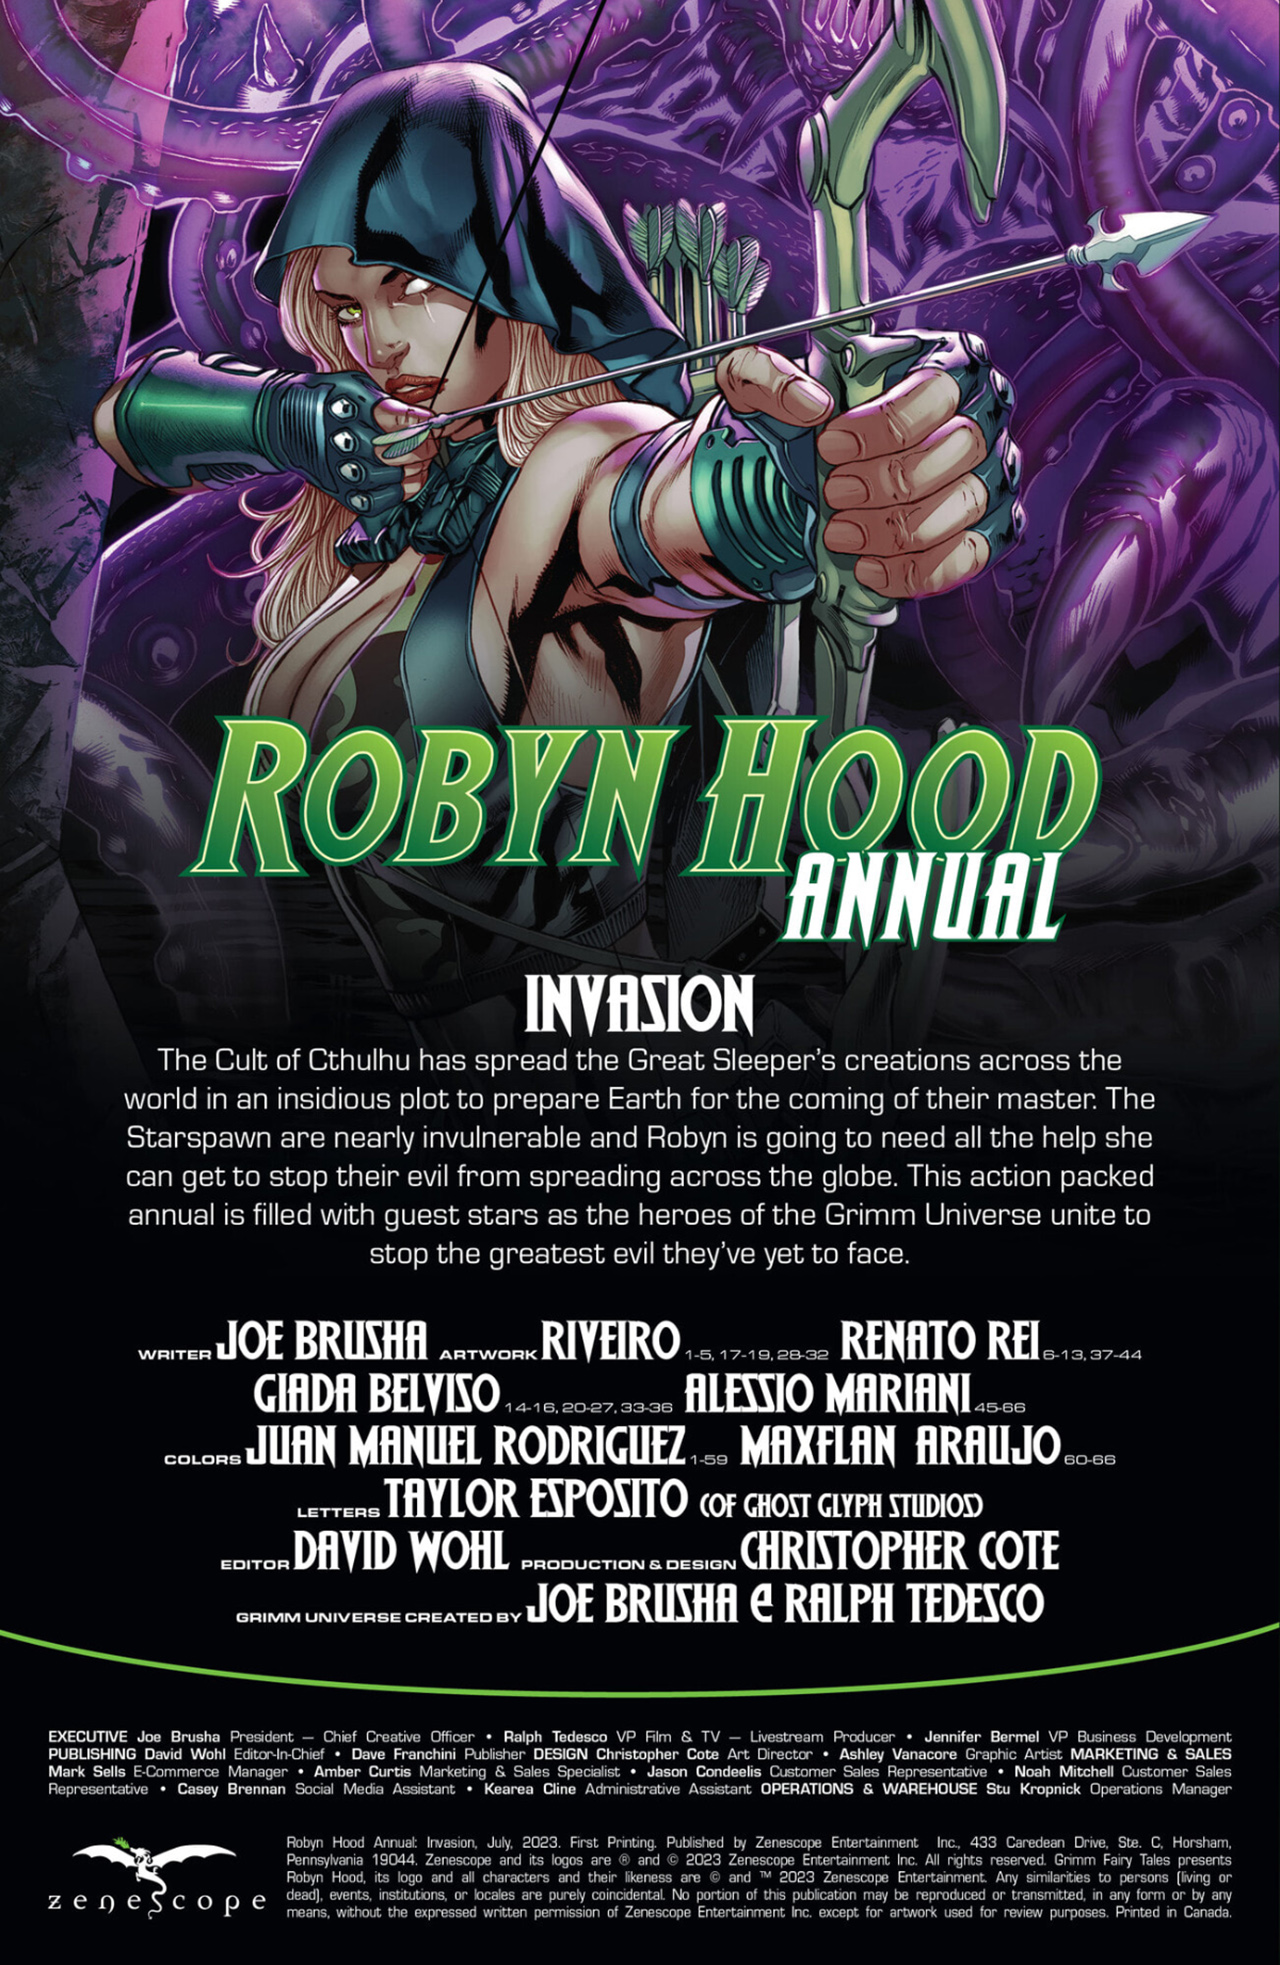 Read online Robyn Hood Annual: Invasion comic -  Issue # Full - 2